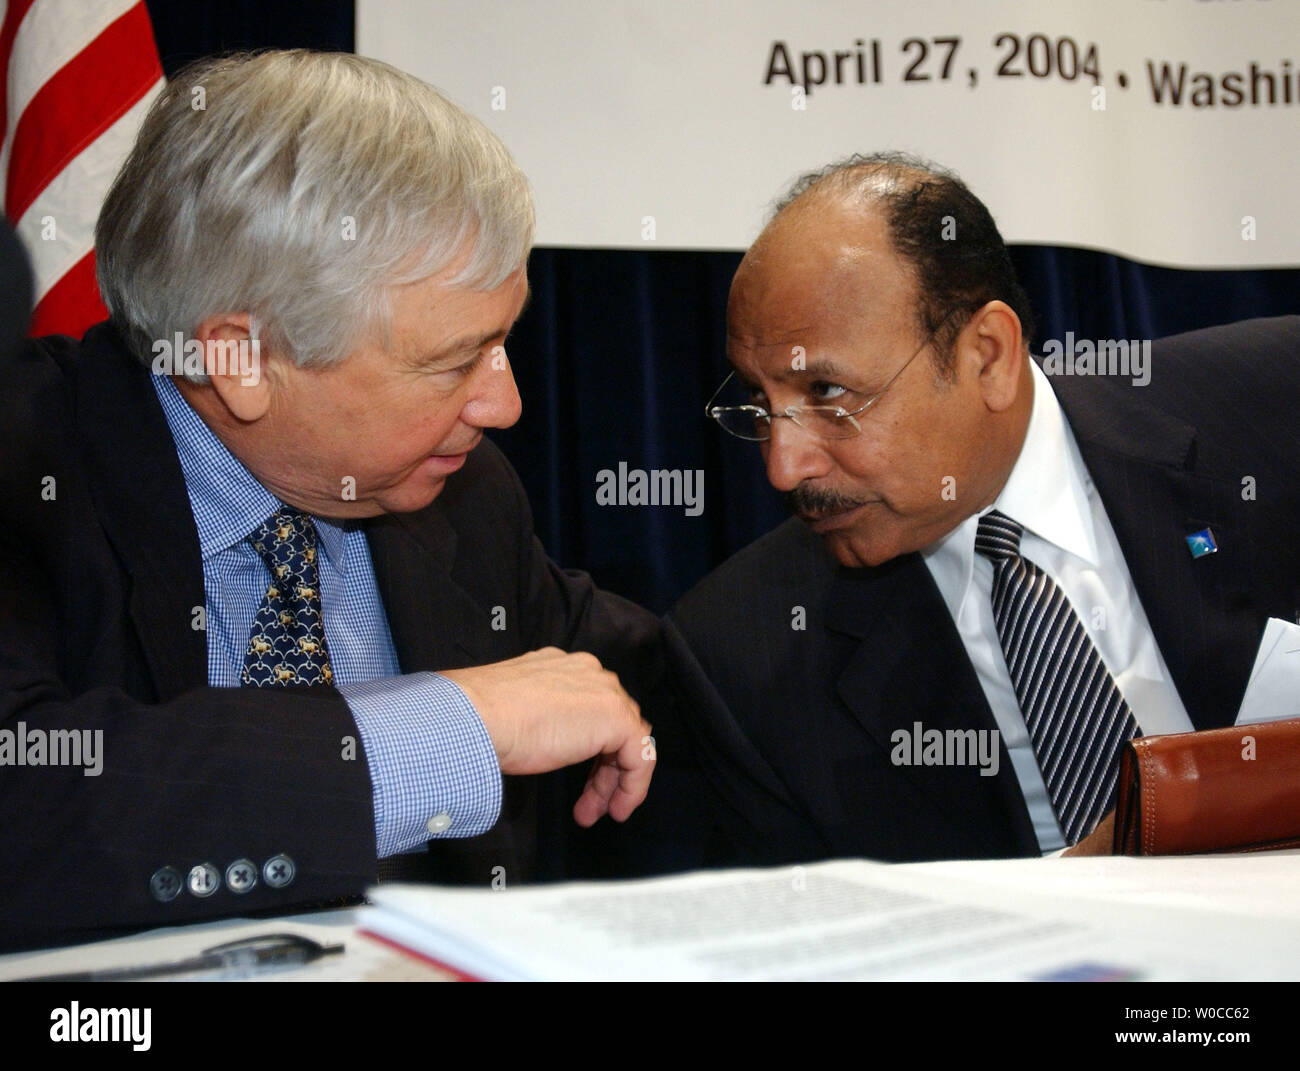 Abdallah Jum'ah, CEO of Saudi Aramco speaks with Guy Caruso, Administrator of the Energy Information Administration, right, during a conference on the United States and Saudi Arabia relationship and their interests in energy security, on April 27, 2004 in Washington.  The conference was sponsored by CSIS and dealt with oil reserves, production, prices and security. (UPI Photo/Michael Kleinfeld) Stock Photo